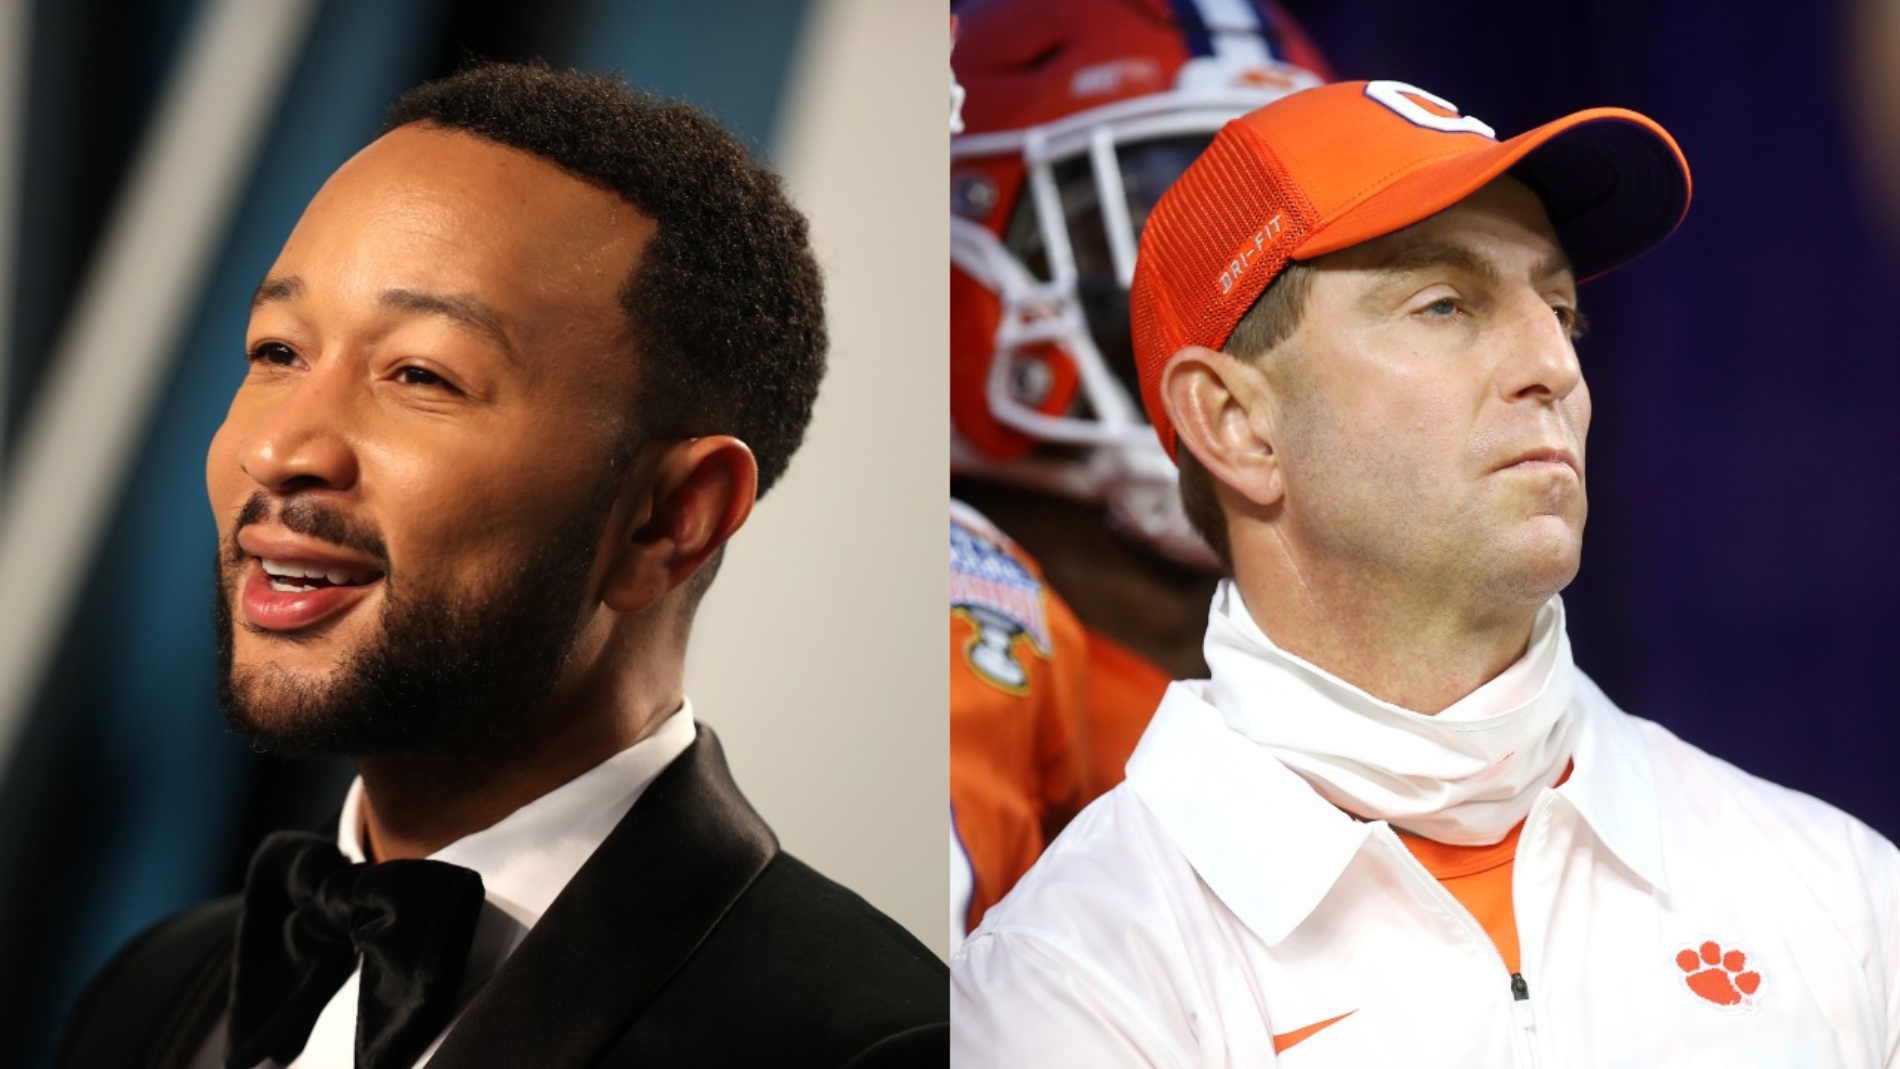 Dabo Swinney and his Clemson Tigers lost to Ohio State in the CFP semifinals, 49-28. Music superstar John Legend then took a shot at him.